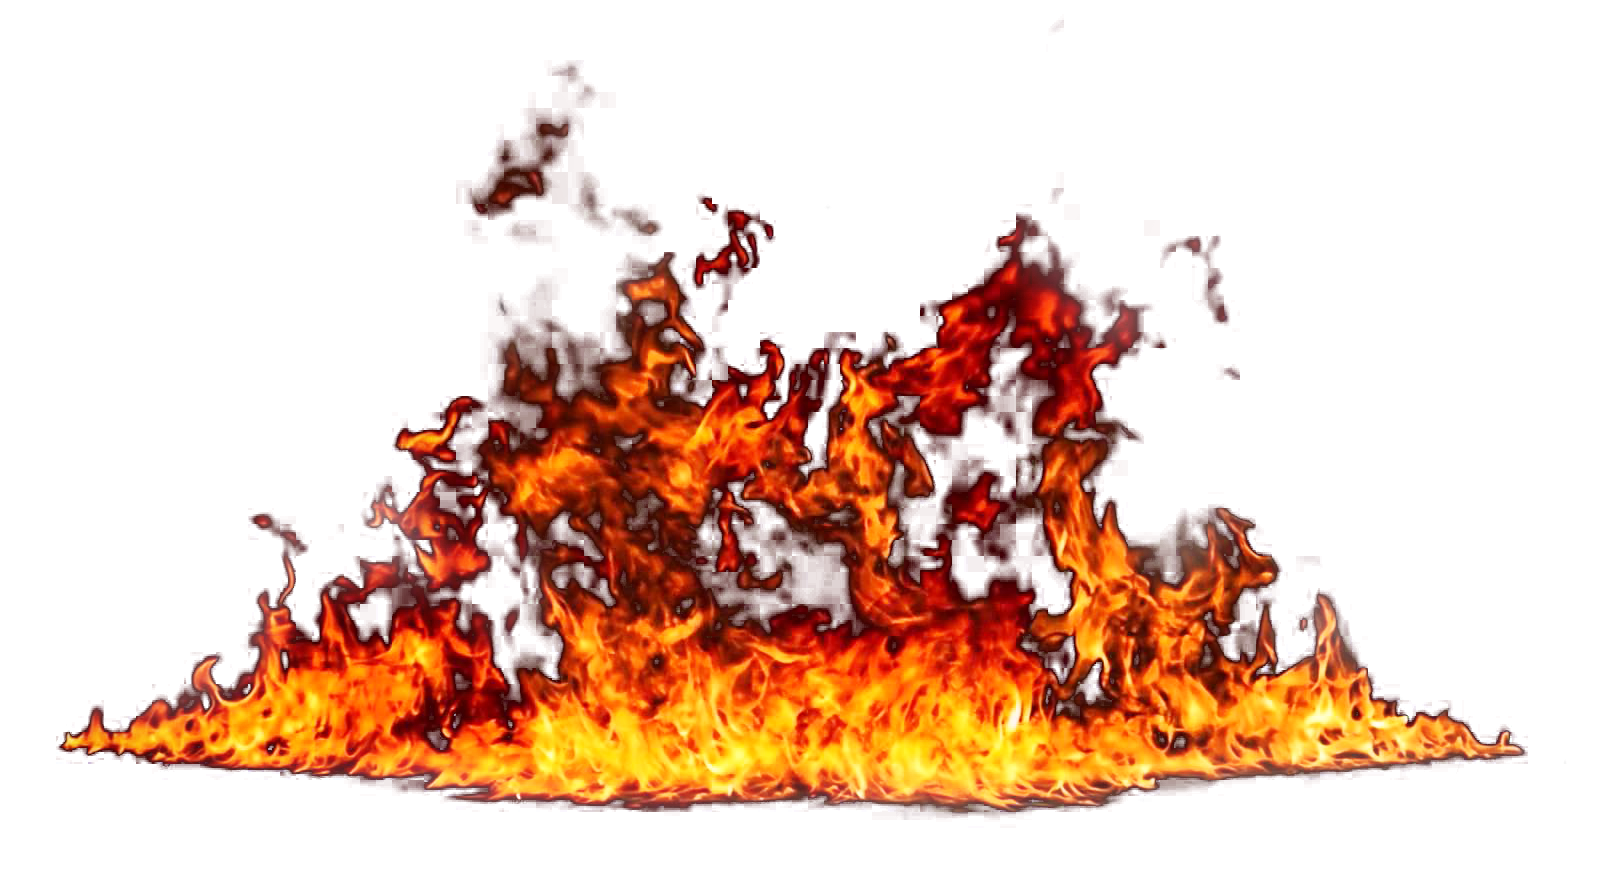 Intense Flameson Gray Background PNG image